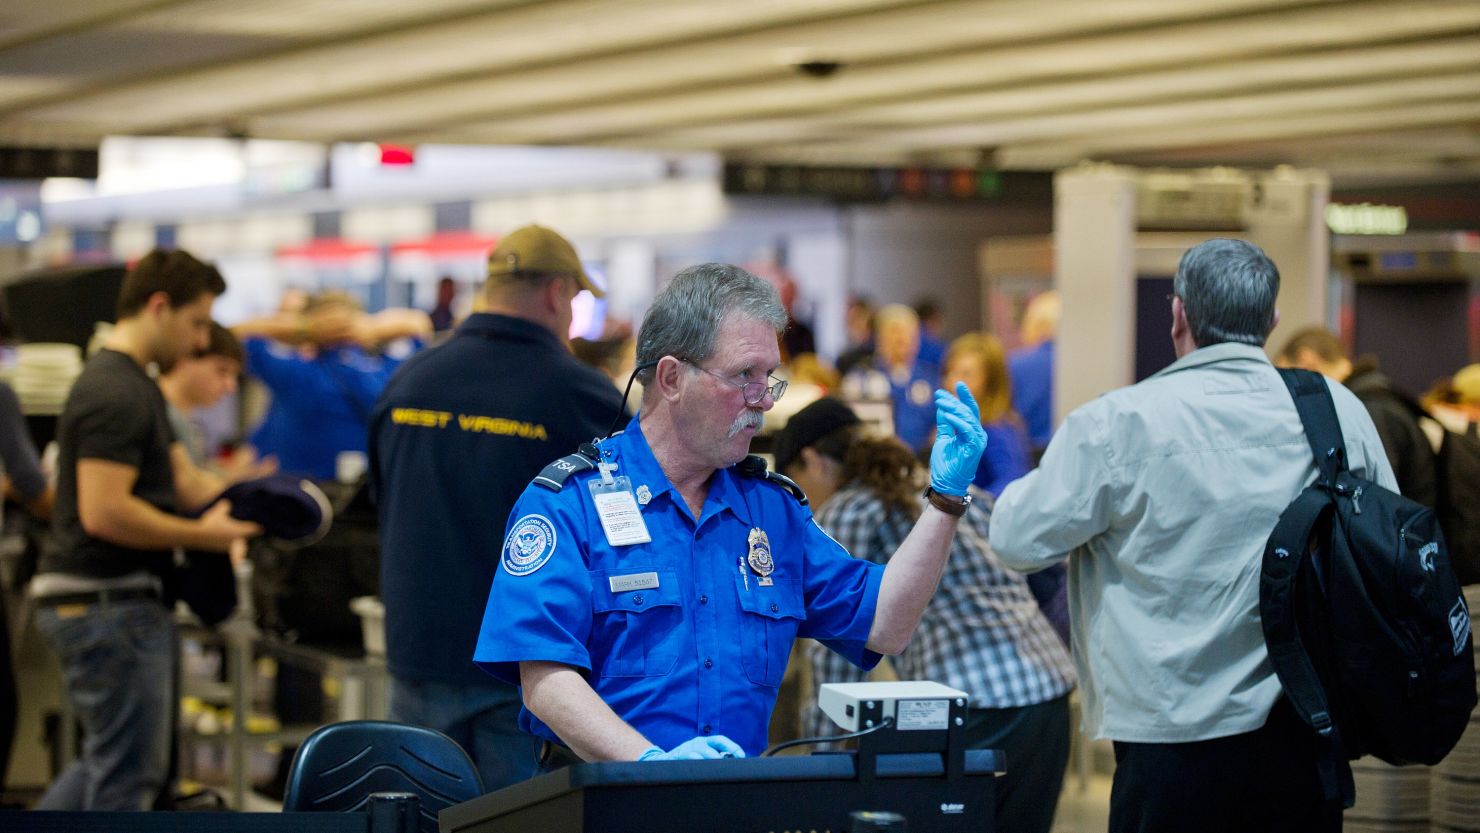 A Transportation Security Administration agent helps travelers move through security lines at Pittsburgh International Airport.